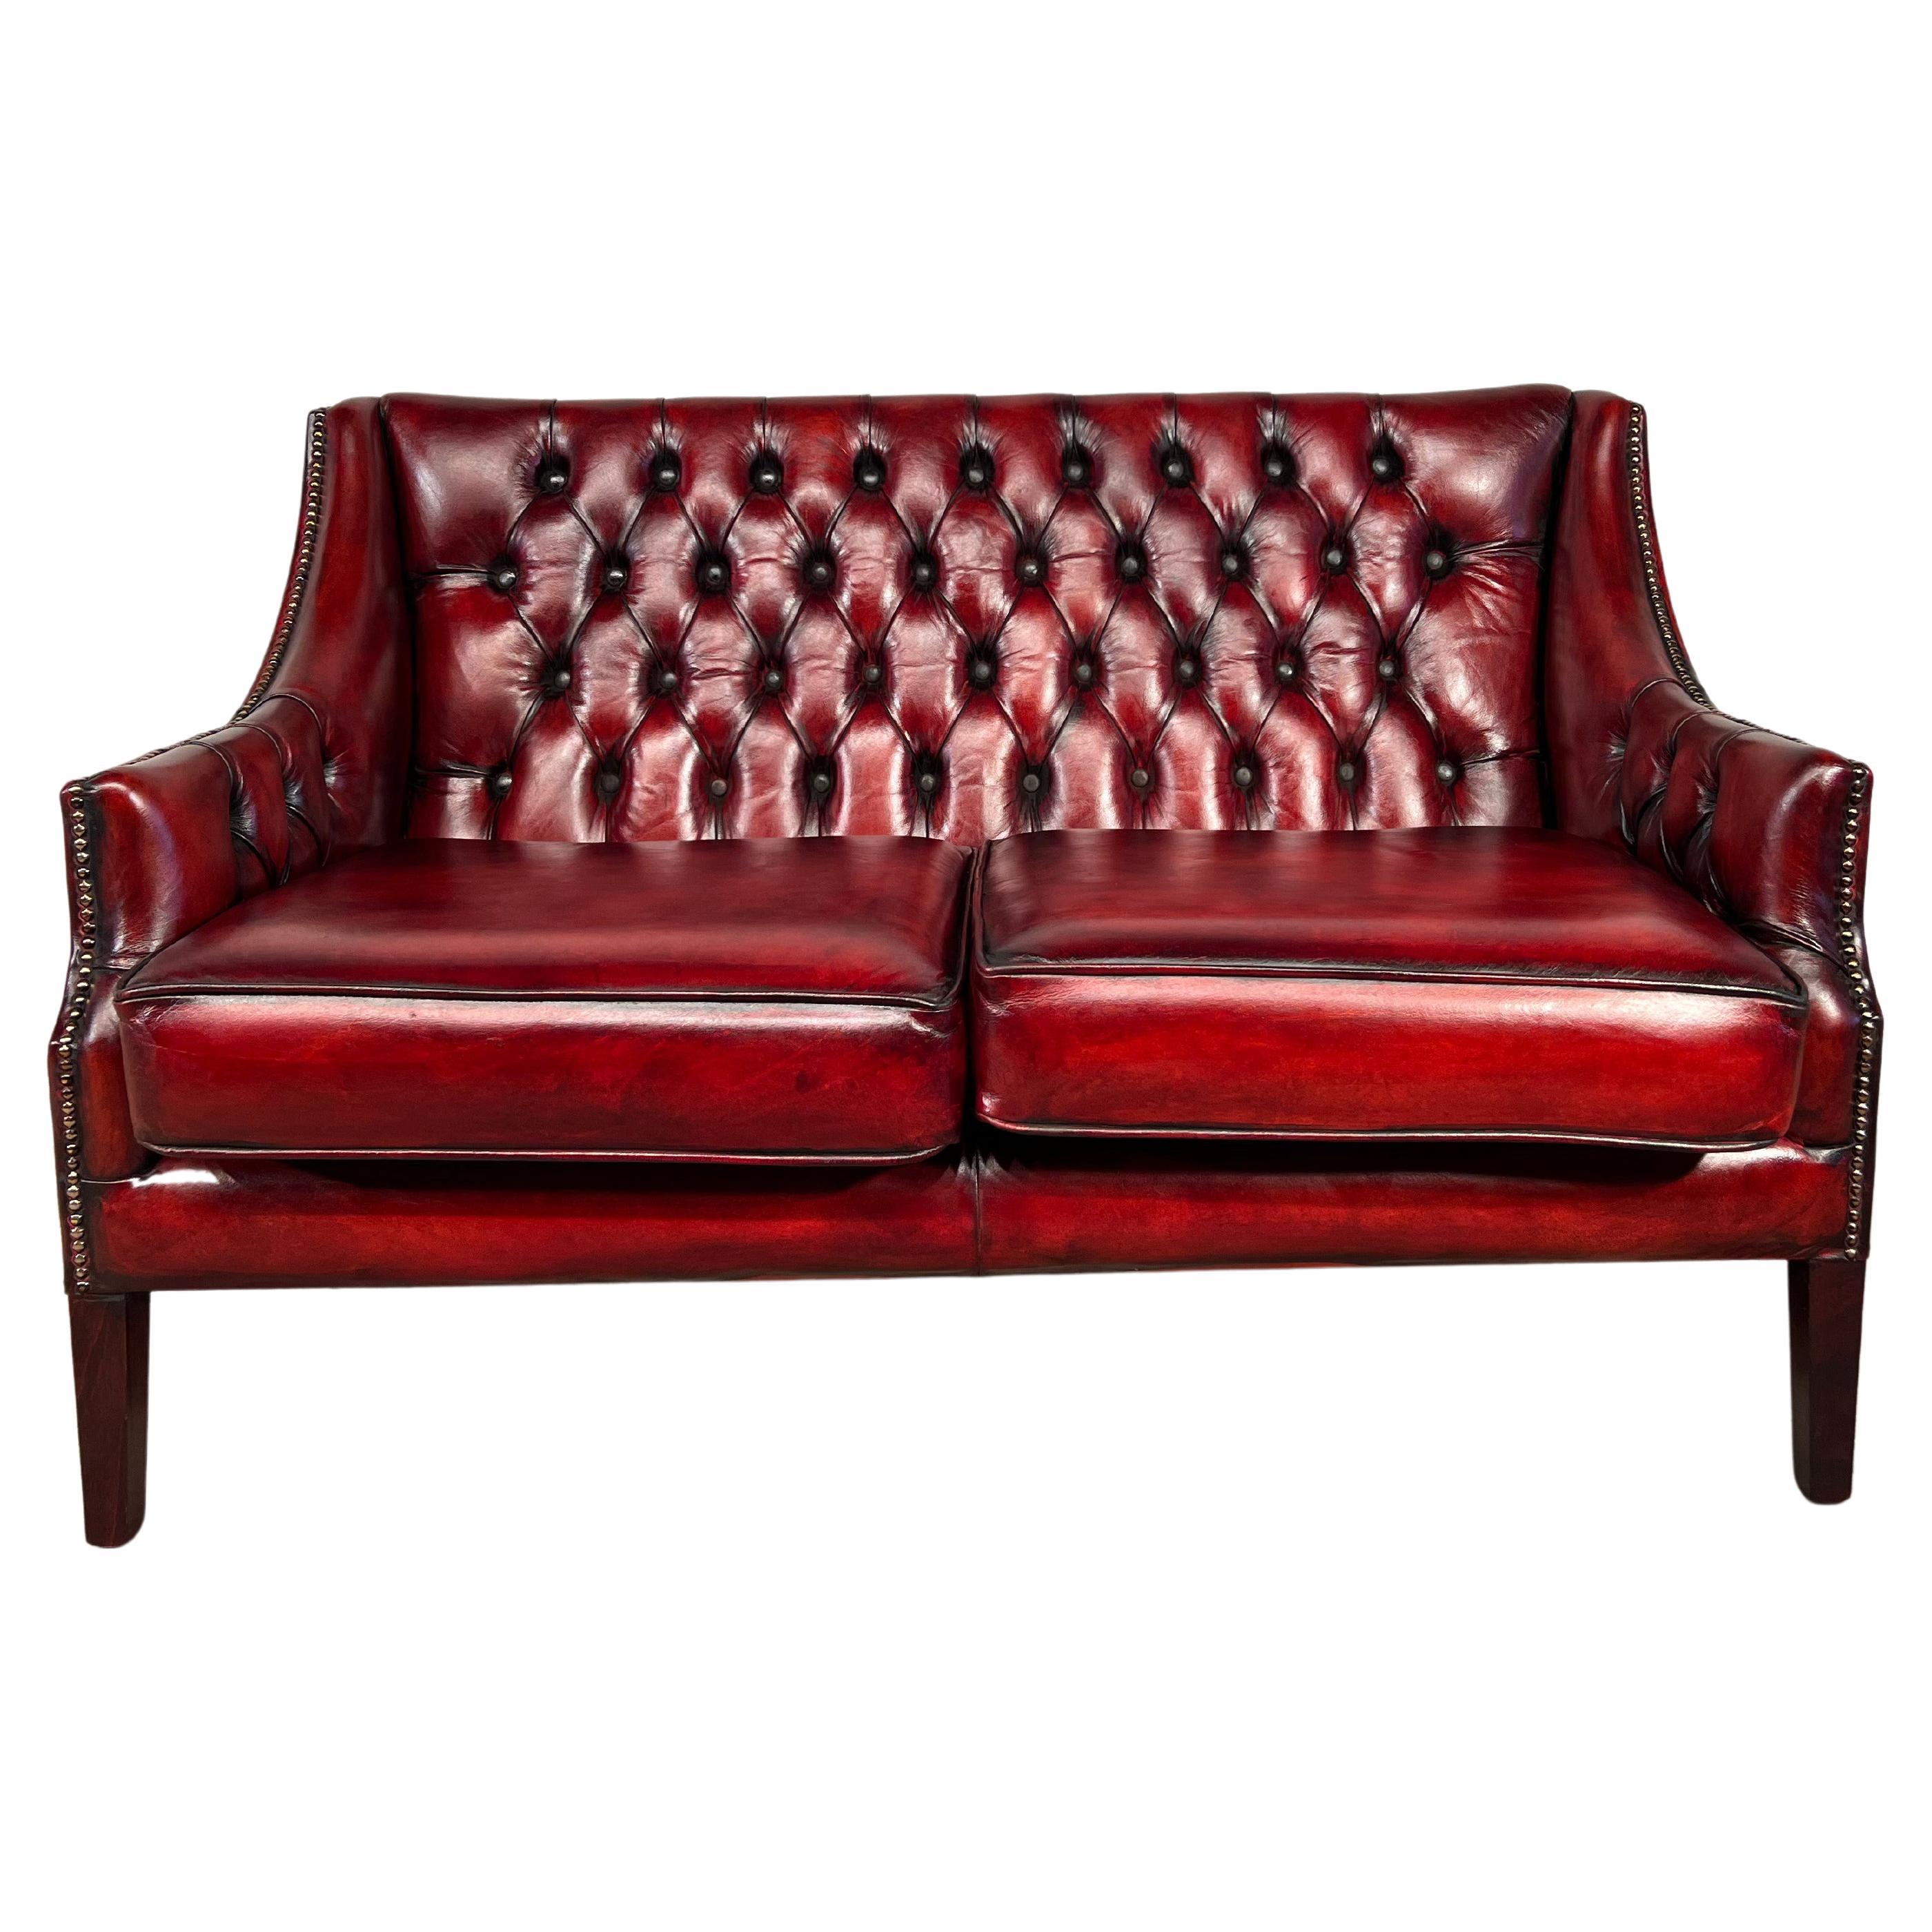 A Neat Mid C English Made Two Seater Chesterfield Sofa Hand dyed Deep Red #495